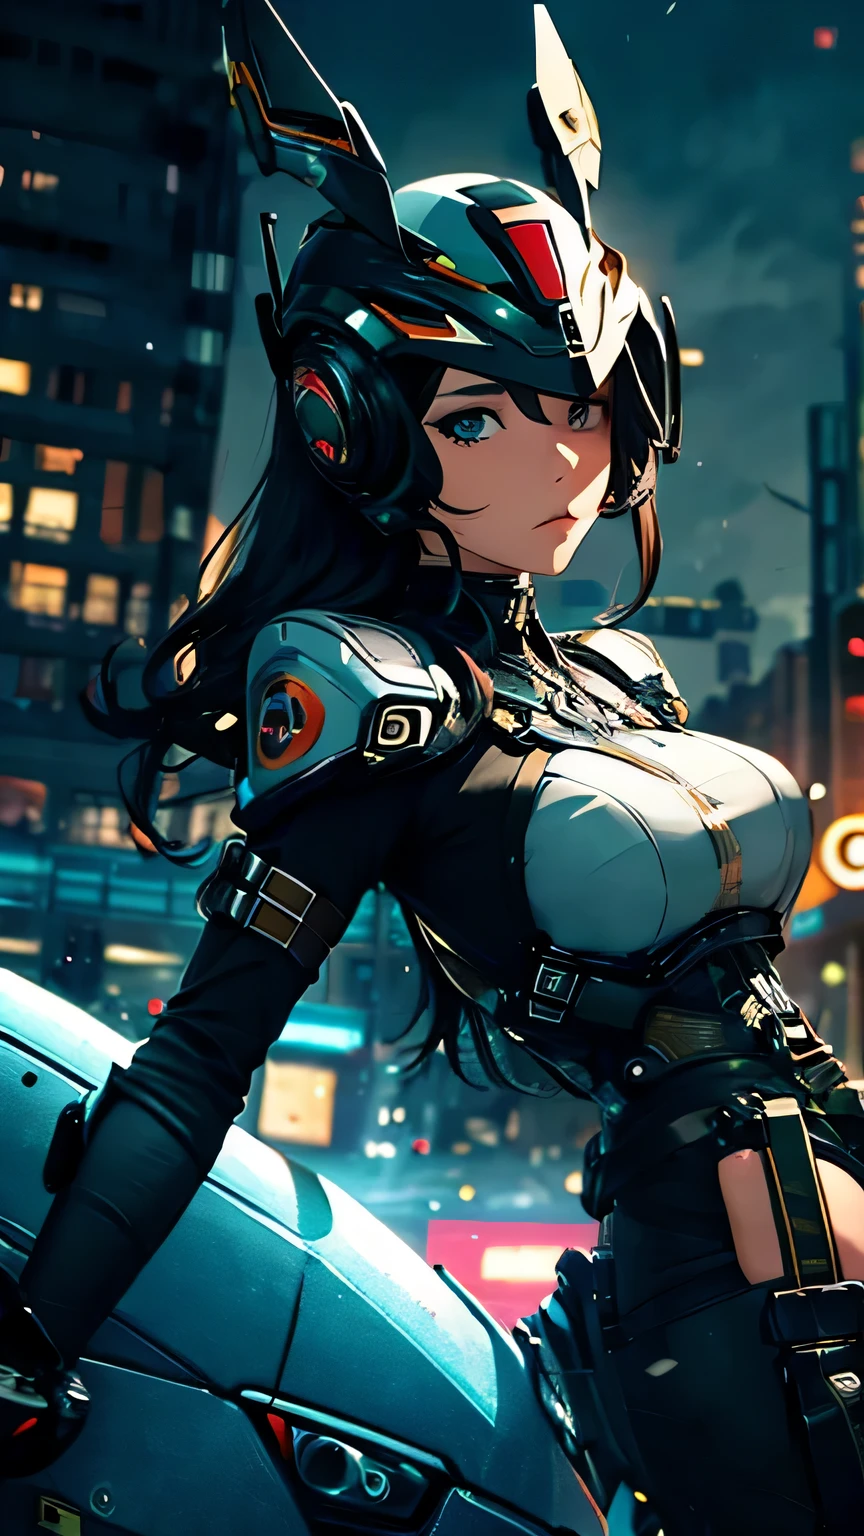 best image quality, excellent details, 超High resolution, (fidelity: 1.4), best illustrations, Favor details, 1girls high concentration, With a delicate and beautiful face, dressed in black and white mecha, Wearing a mecha helmet, Have a direction controller, riding on motorcycle, the background is a high-tech lighting scene of the futuristic city. masterpiece, 最high quality, high quality, High resolution, (portrait)